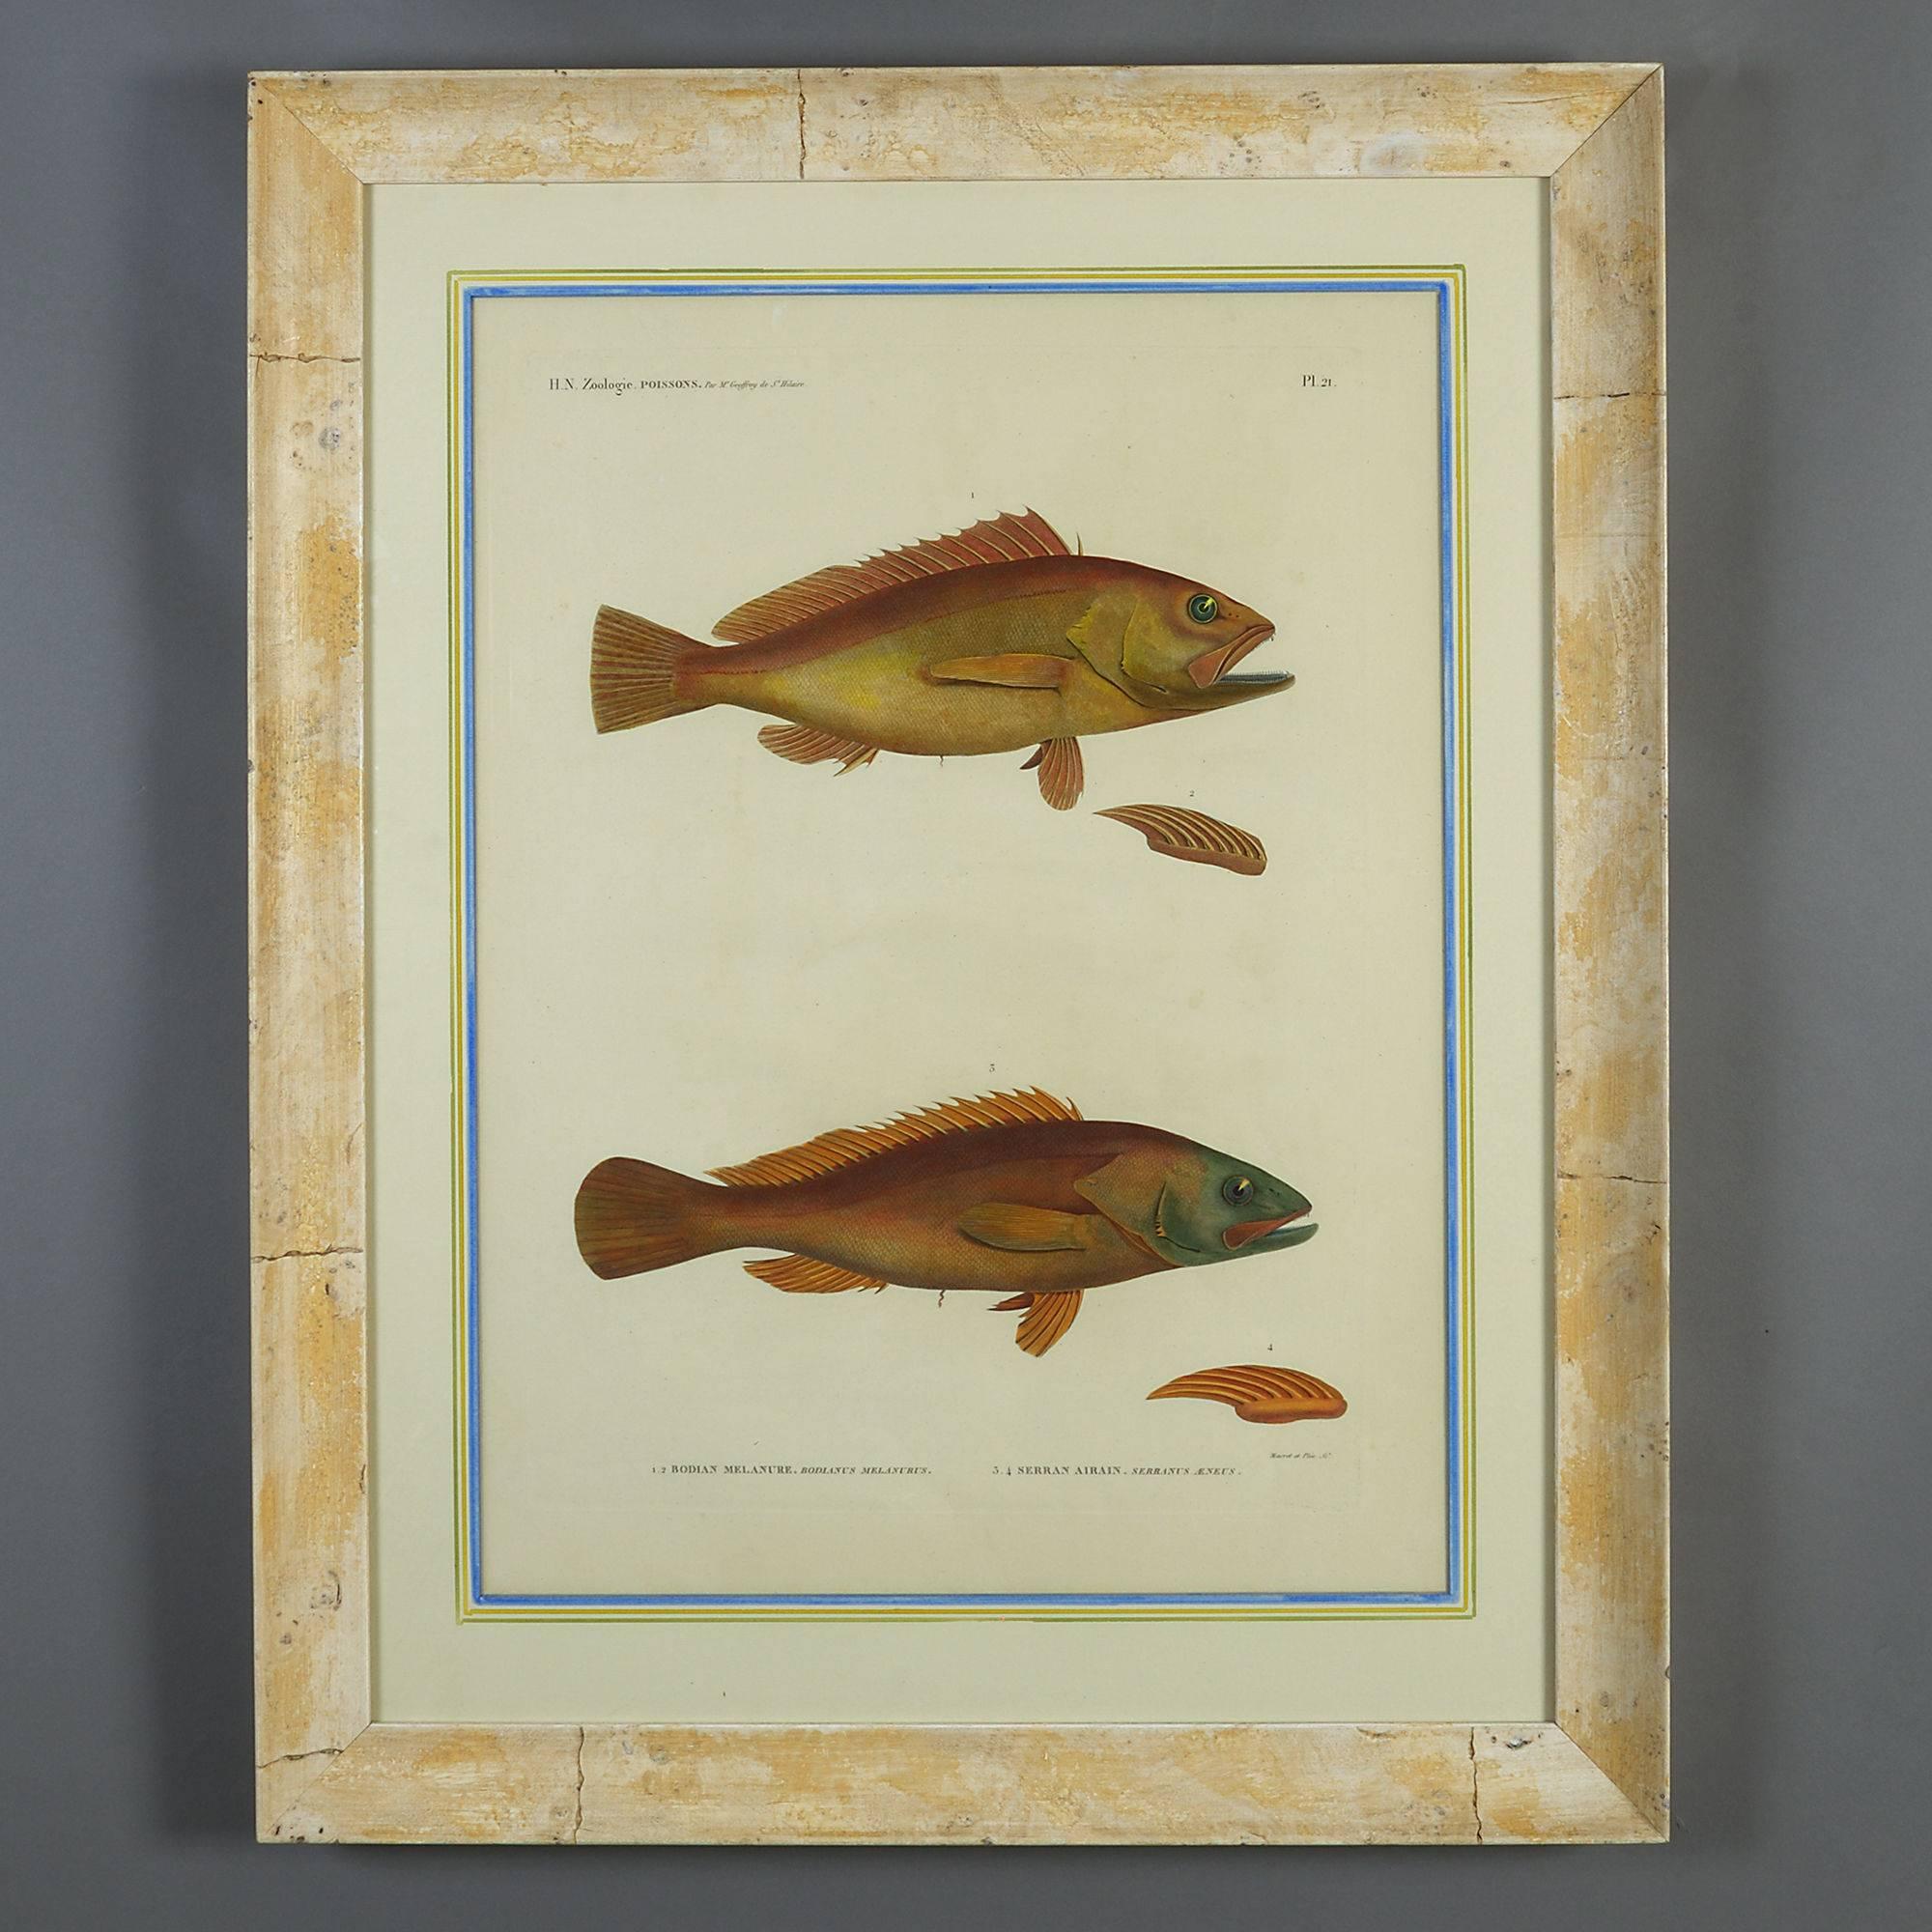 Empire Pair of Hand-Coloured Engravings of Fish from H.N. Zoologie Poissons